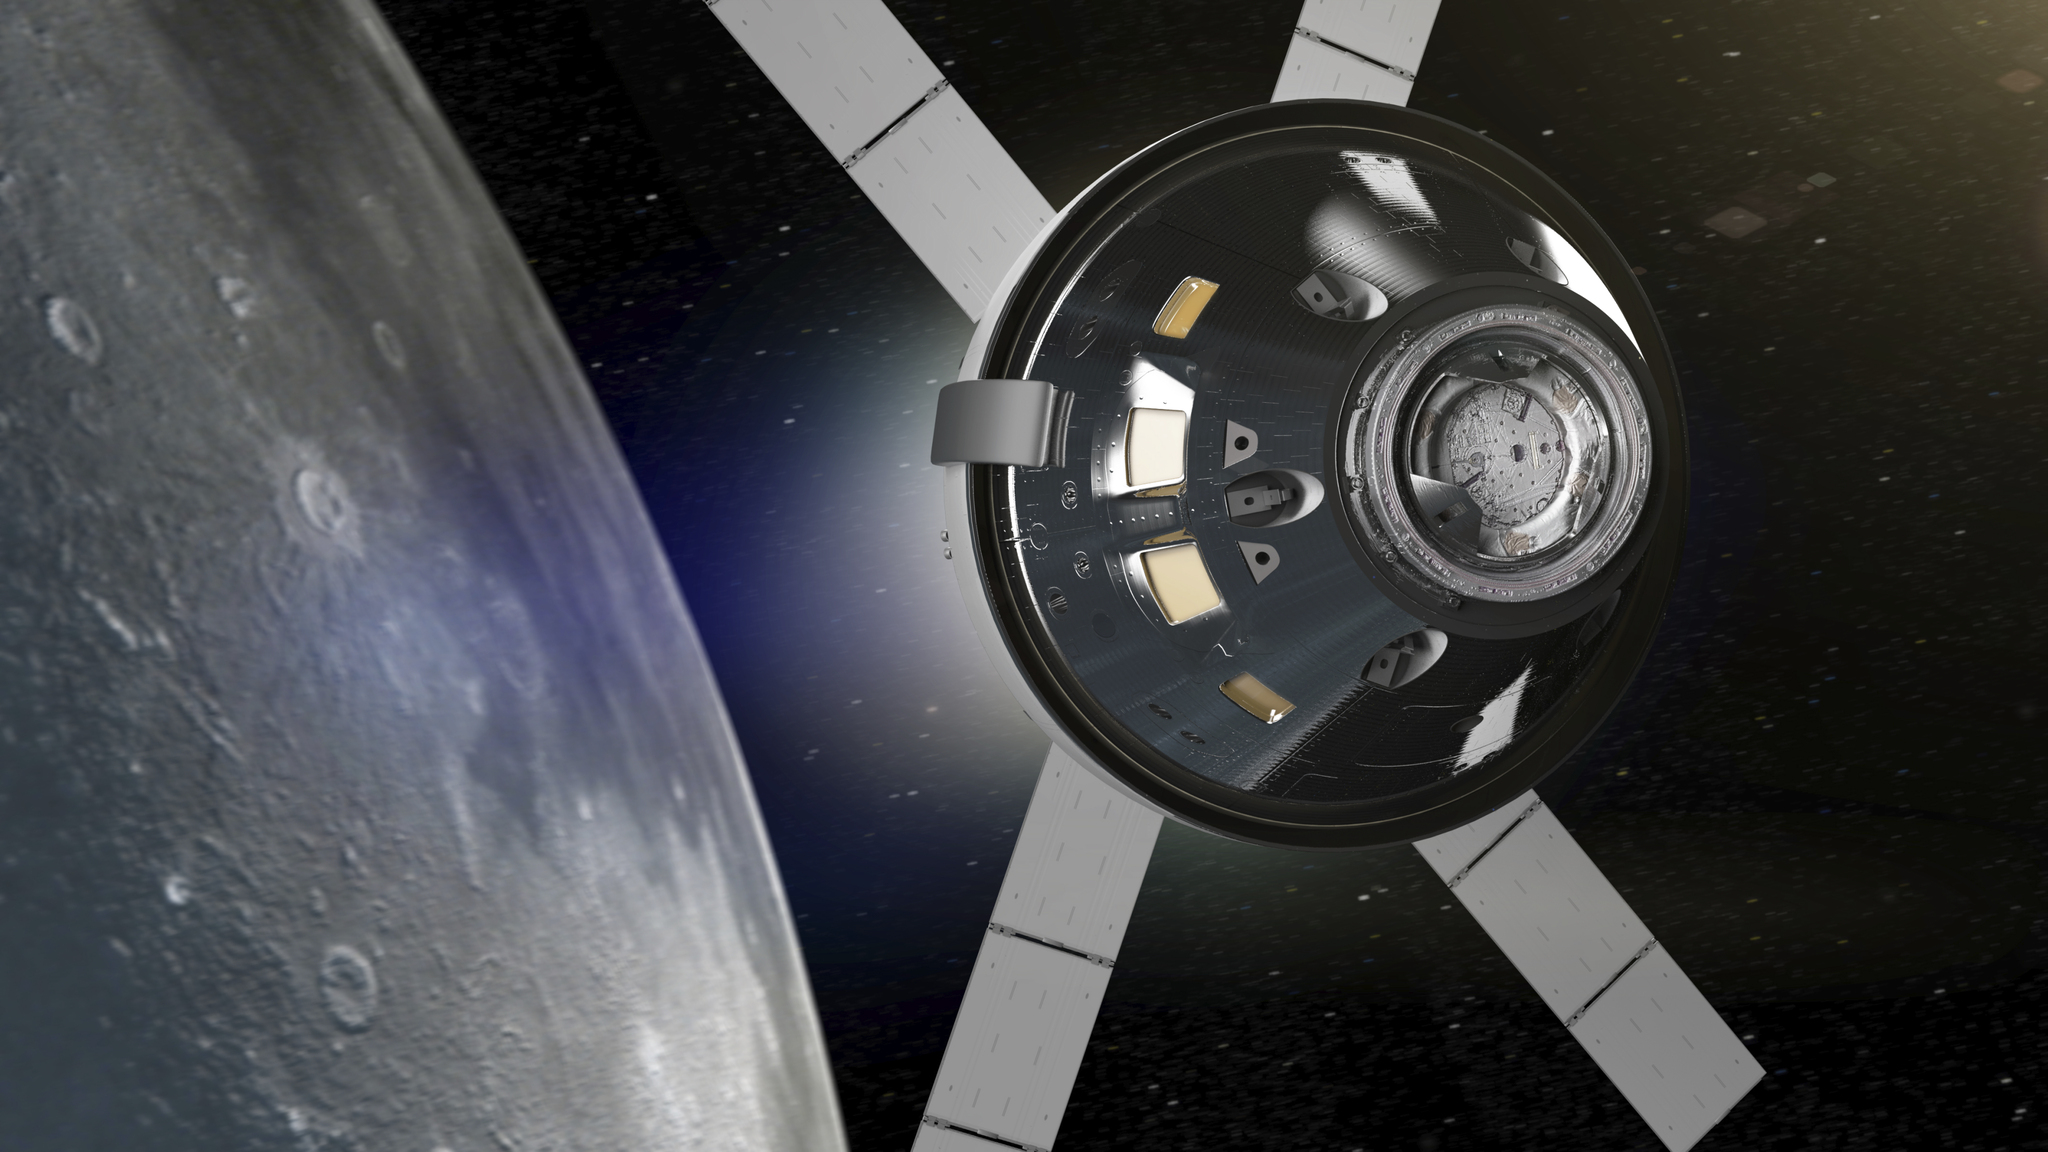 An illustration depicts a black starry background with the Moon shown partially in left corner. The Orion capsule moves toward viewer with four extended solar panels.